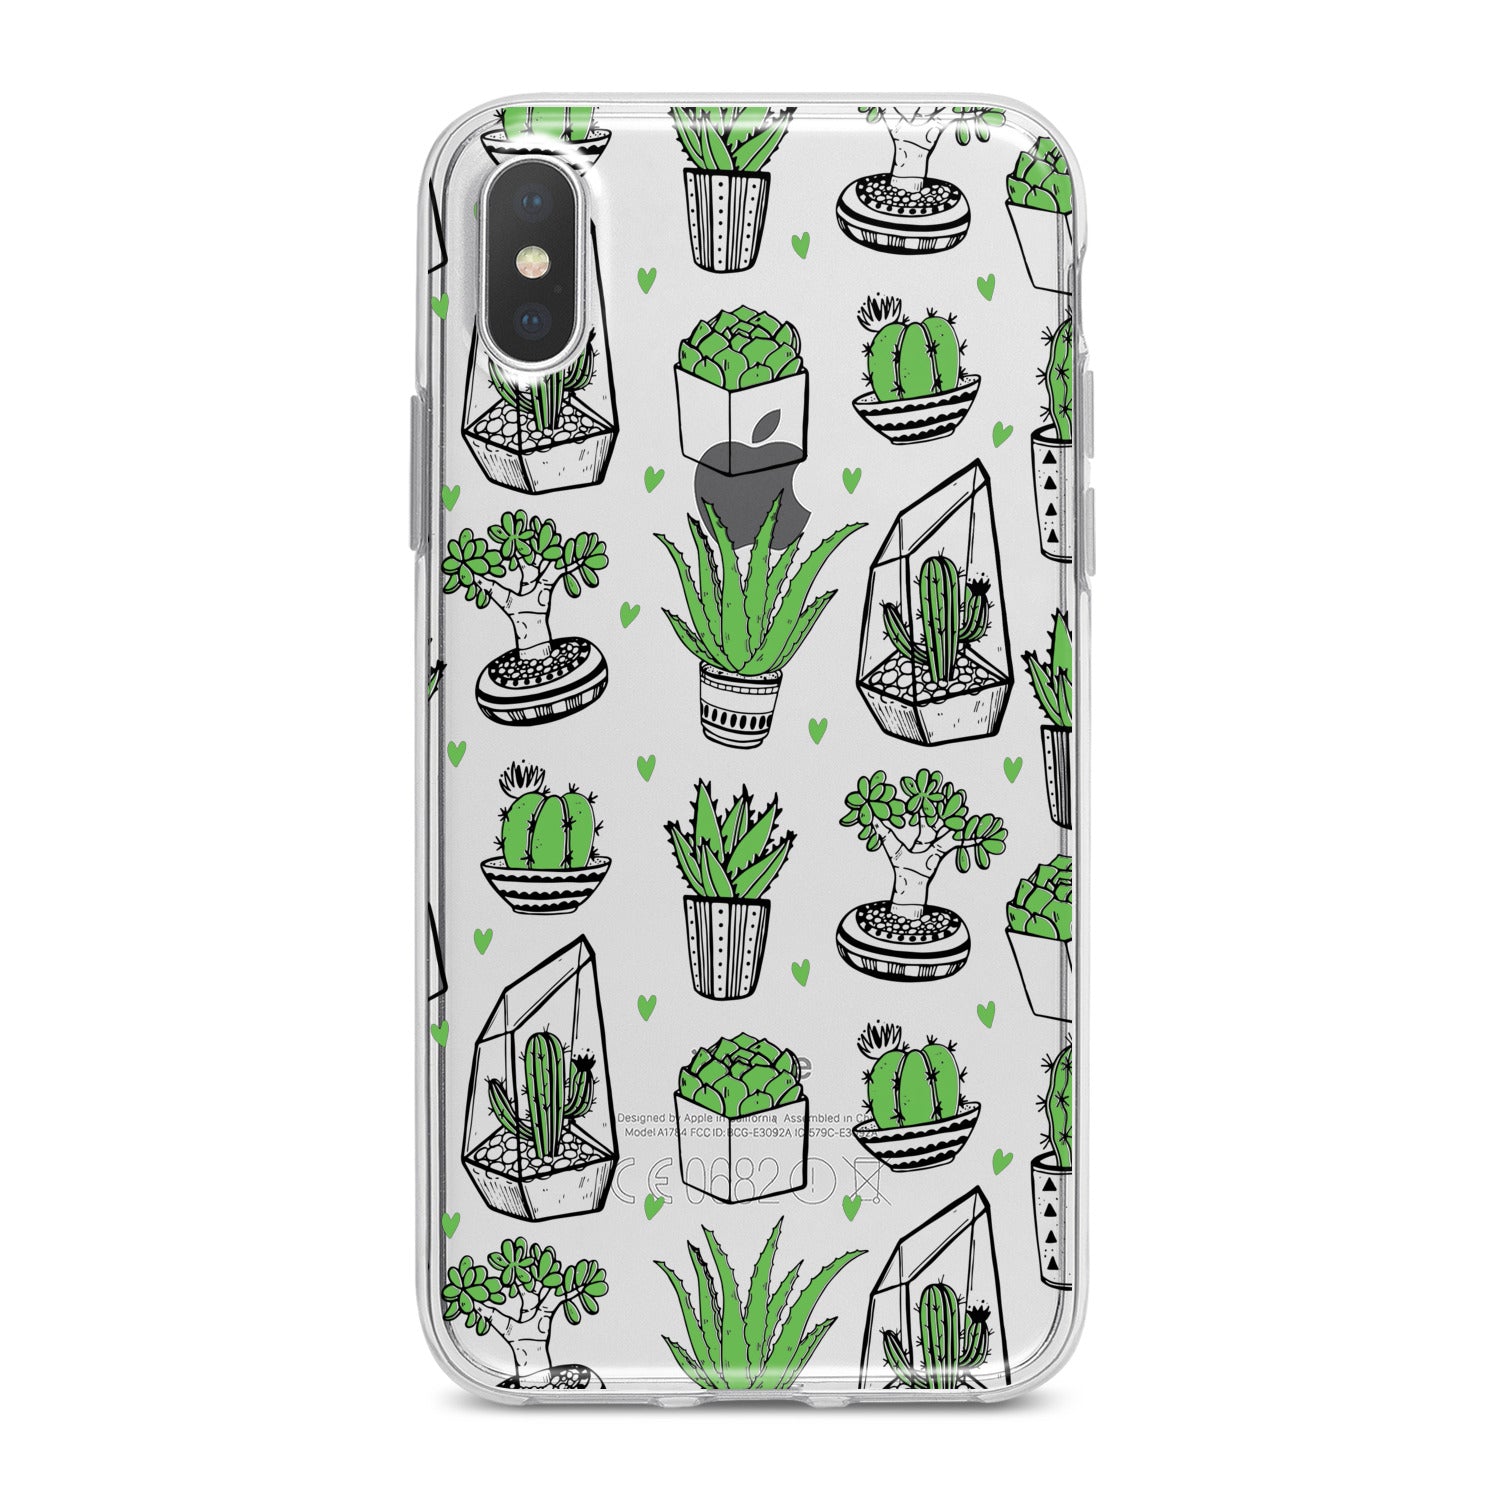 Lex Altern Potted Cacti Art Phone Case for your iPhone & Android phone.